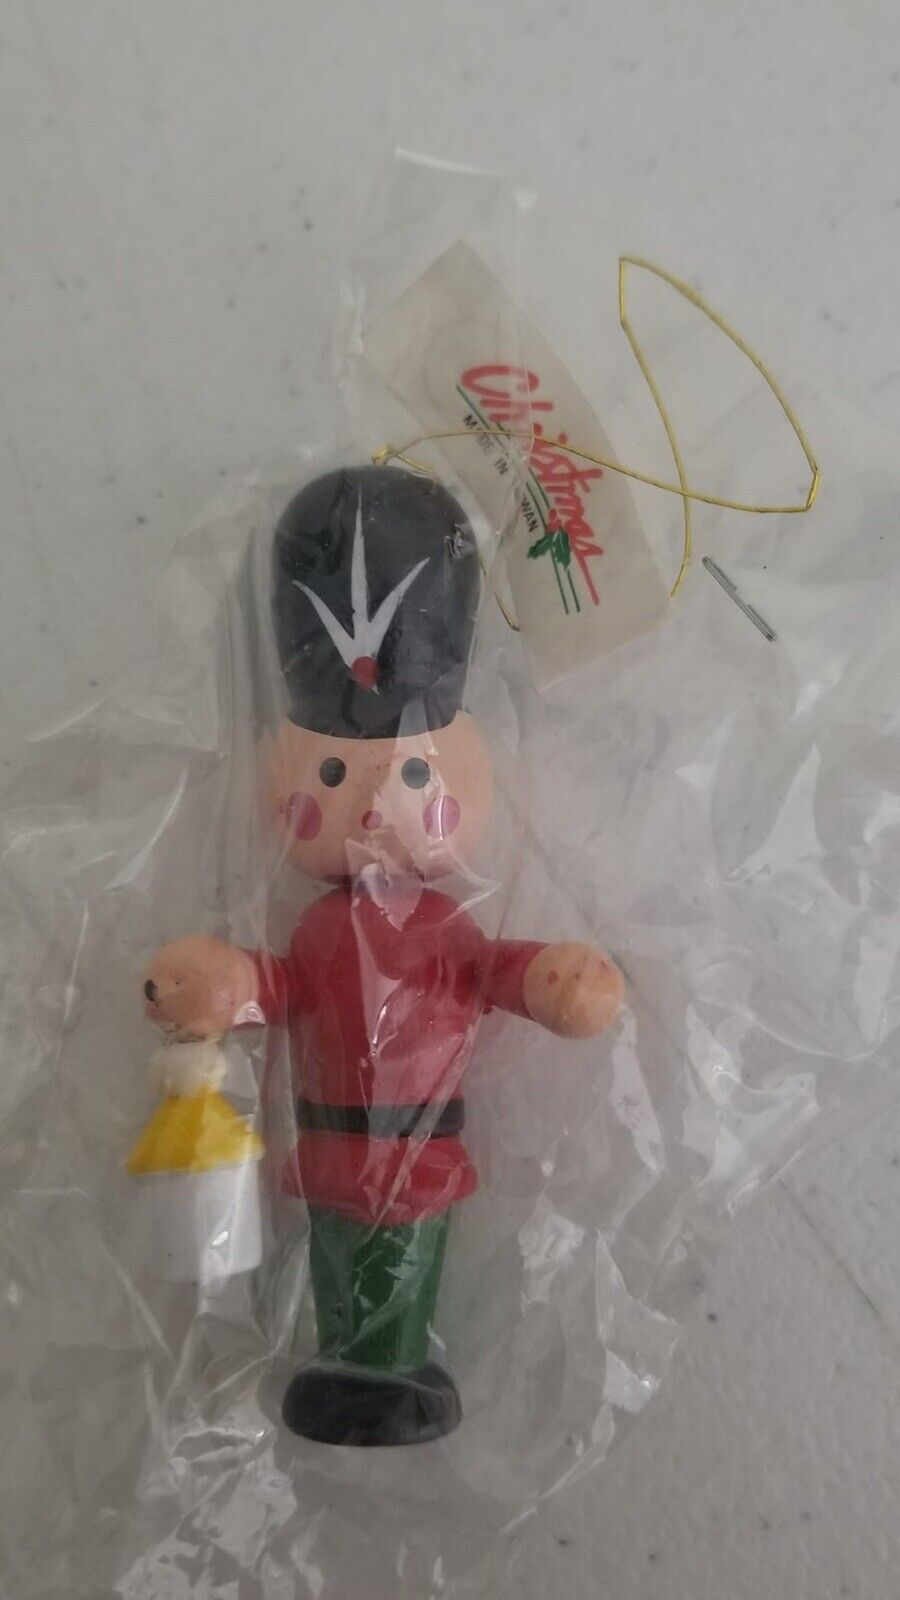 Vintage Hand-Painted Nutcracker Soldier Christmas Ornaments - Collectible Set of 3 from Taiwan - TreasuTiques